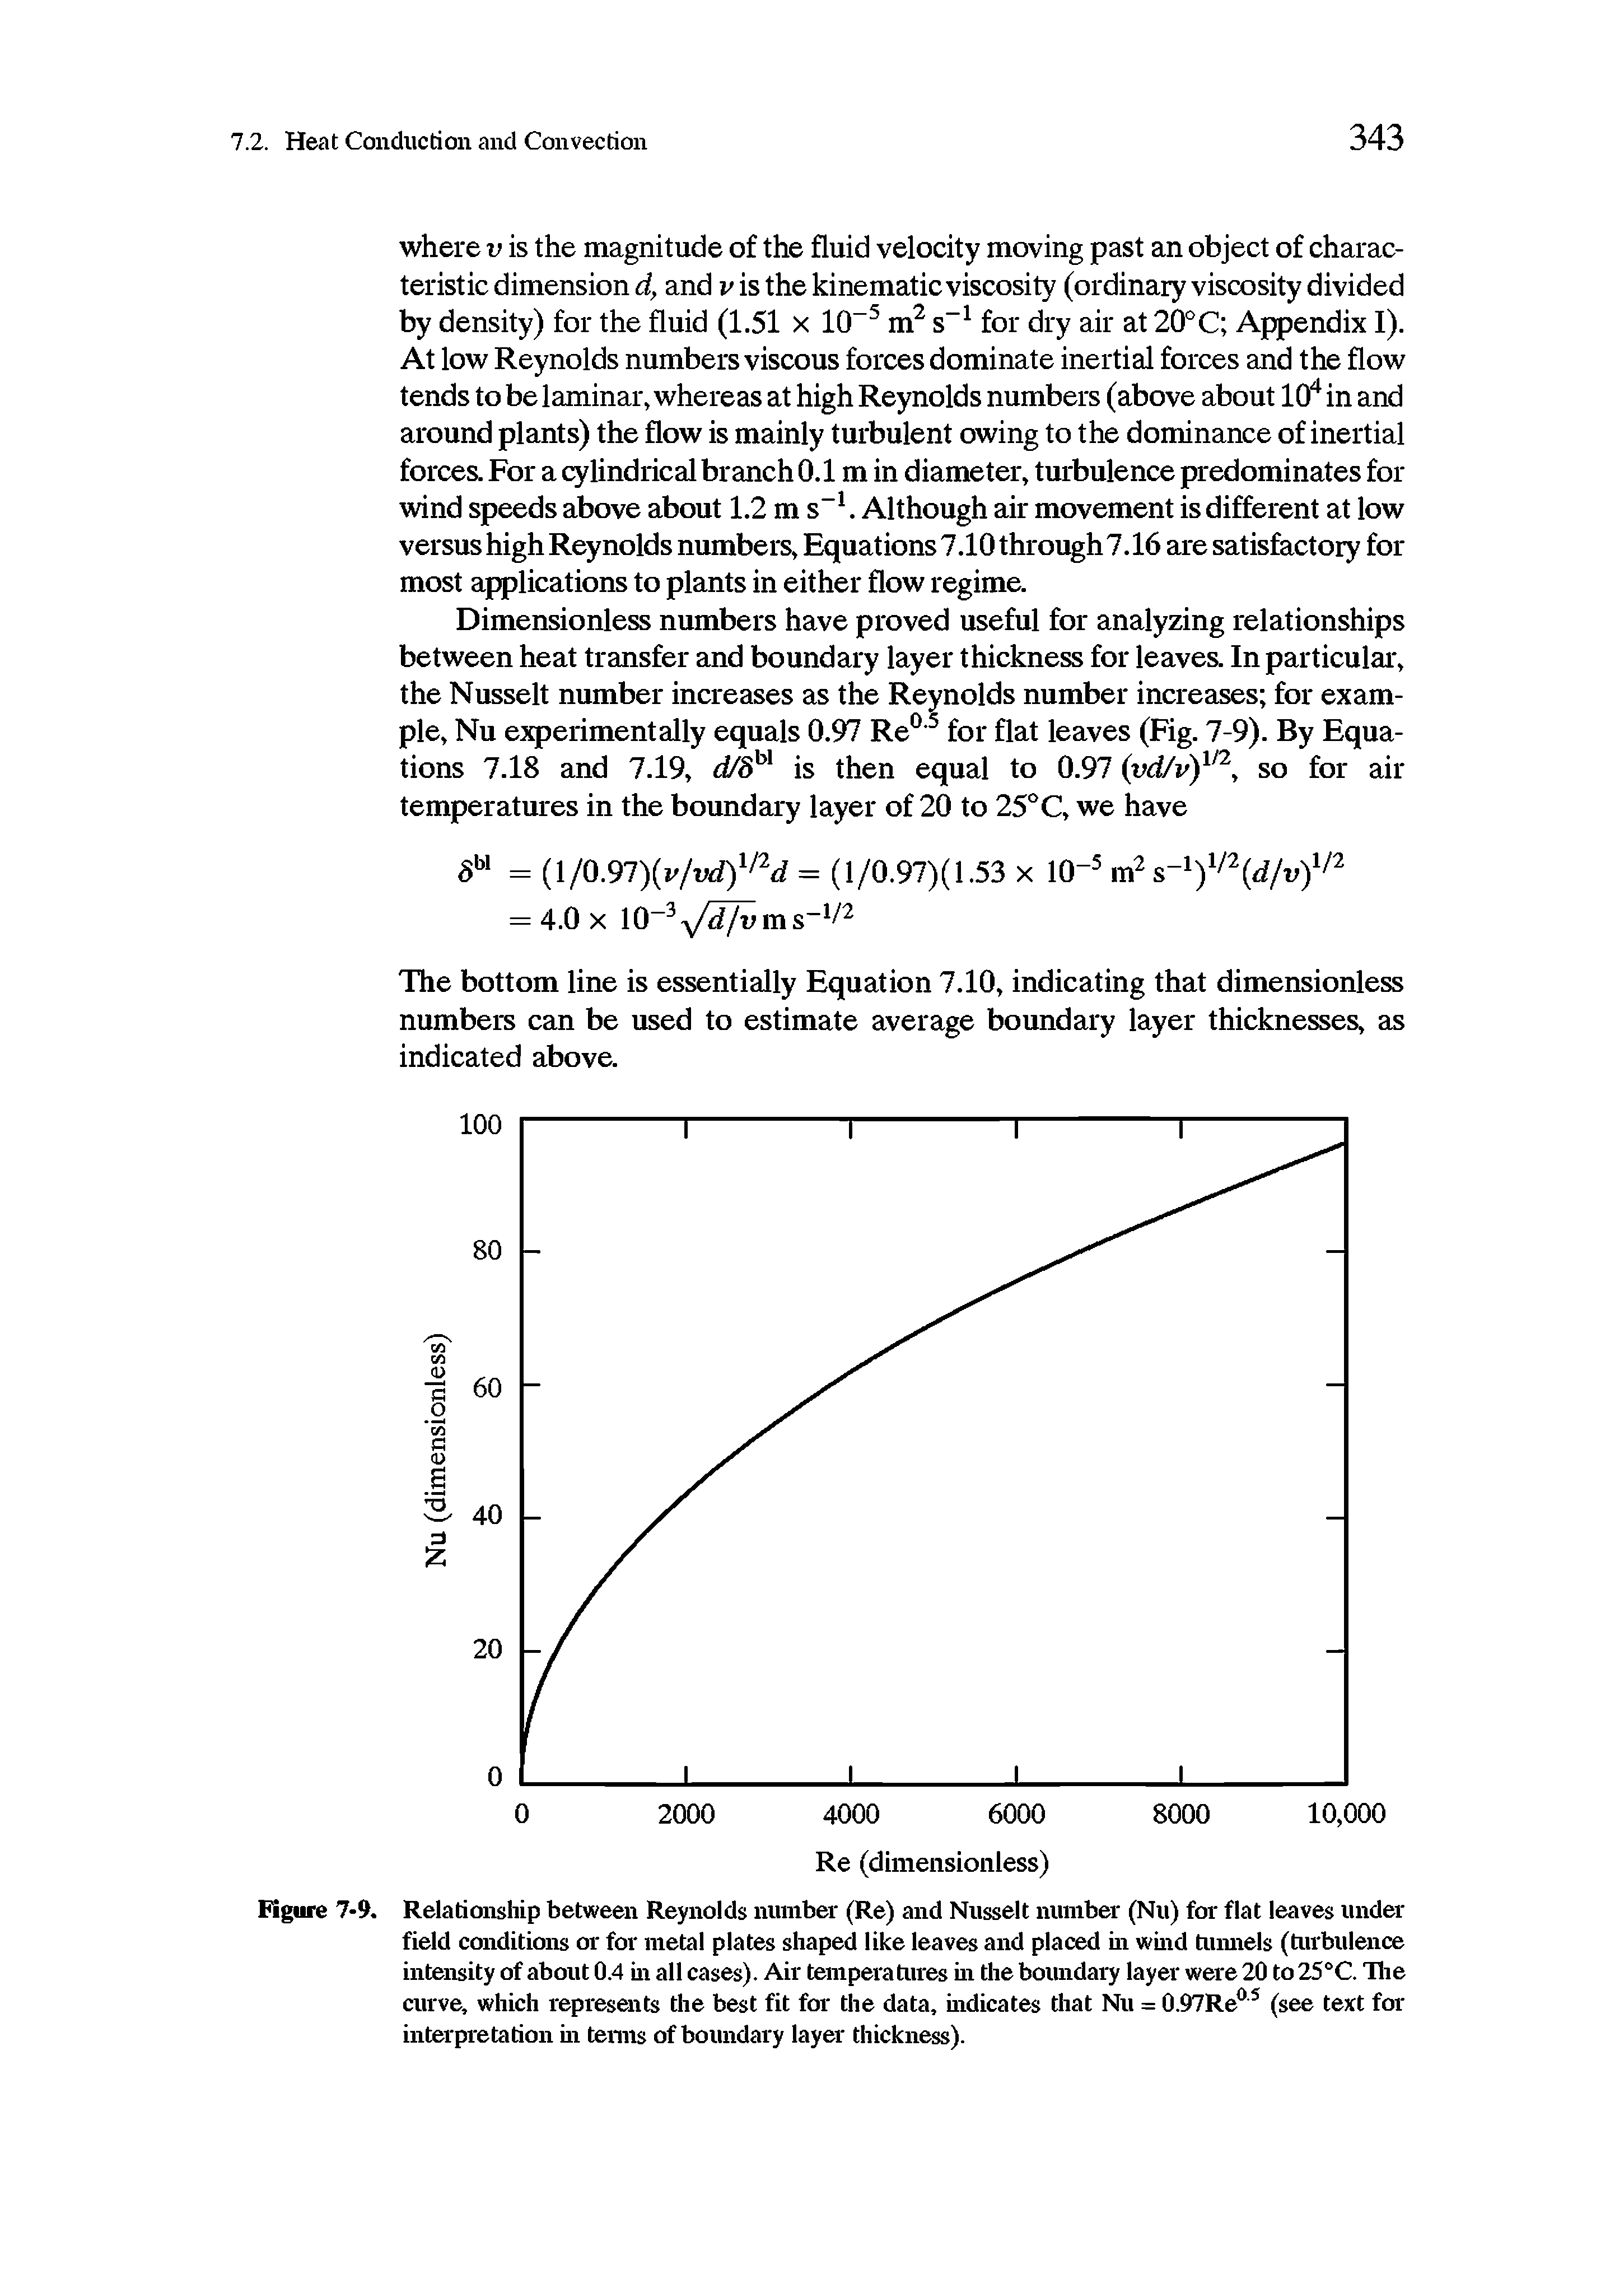 Figure 7-9. Relationship between Reynolds number (Re) and Nusselt number (Nu) for flat leaves under field conditions or for metal plates shaped like leaves and placed in wind tunnels (turbulence intensity of about 0.4 in all cases). Air temperatures in the boundary layer were 20 to 25°C. The curve, which represents the best fit for the data, indicates that Nu = 0.97Re°5 (see text for interpretation in terms of boundary layer thickness).